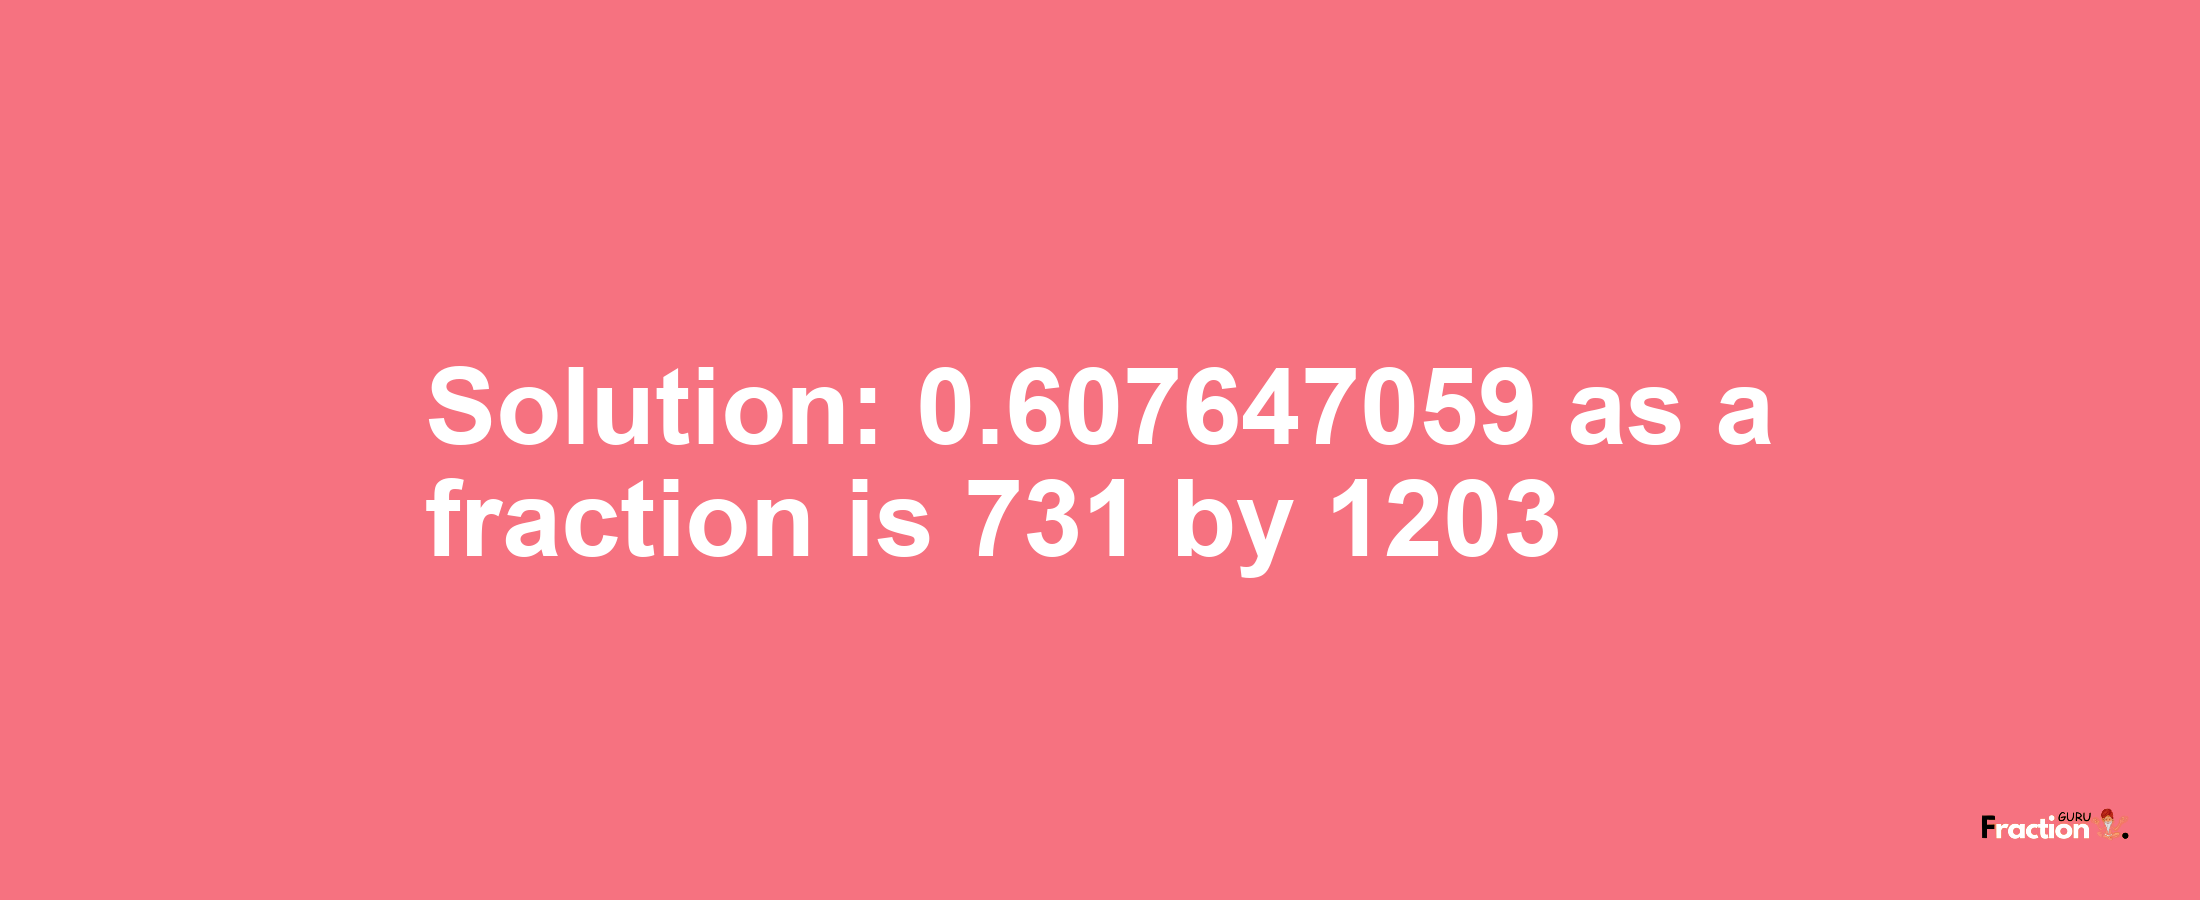 Solution:0.607647059 as a fraction is 731/1203